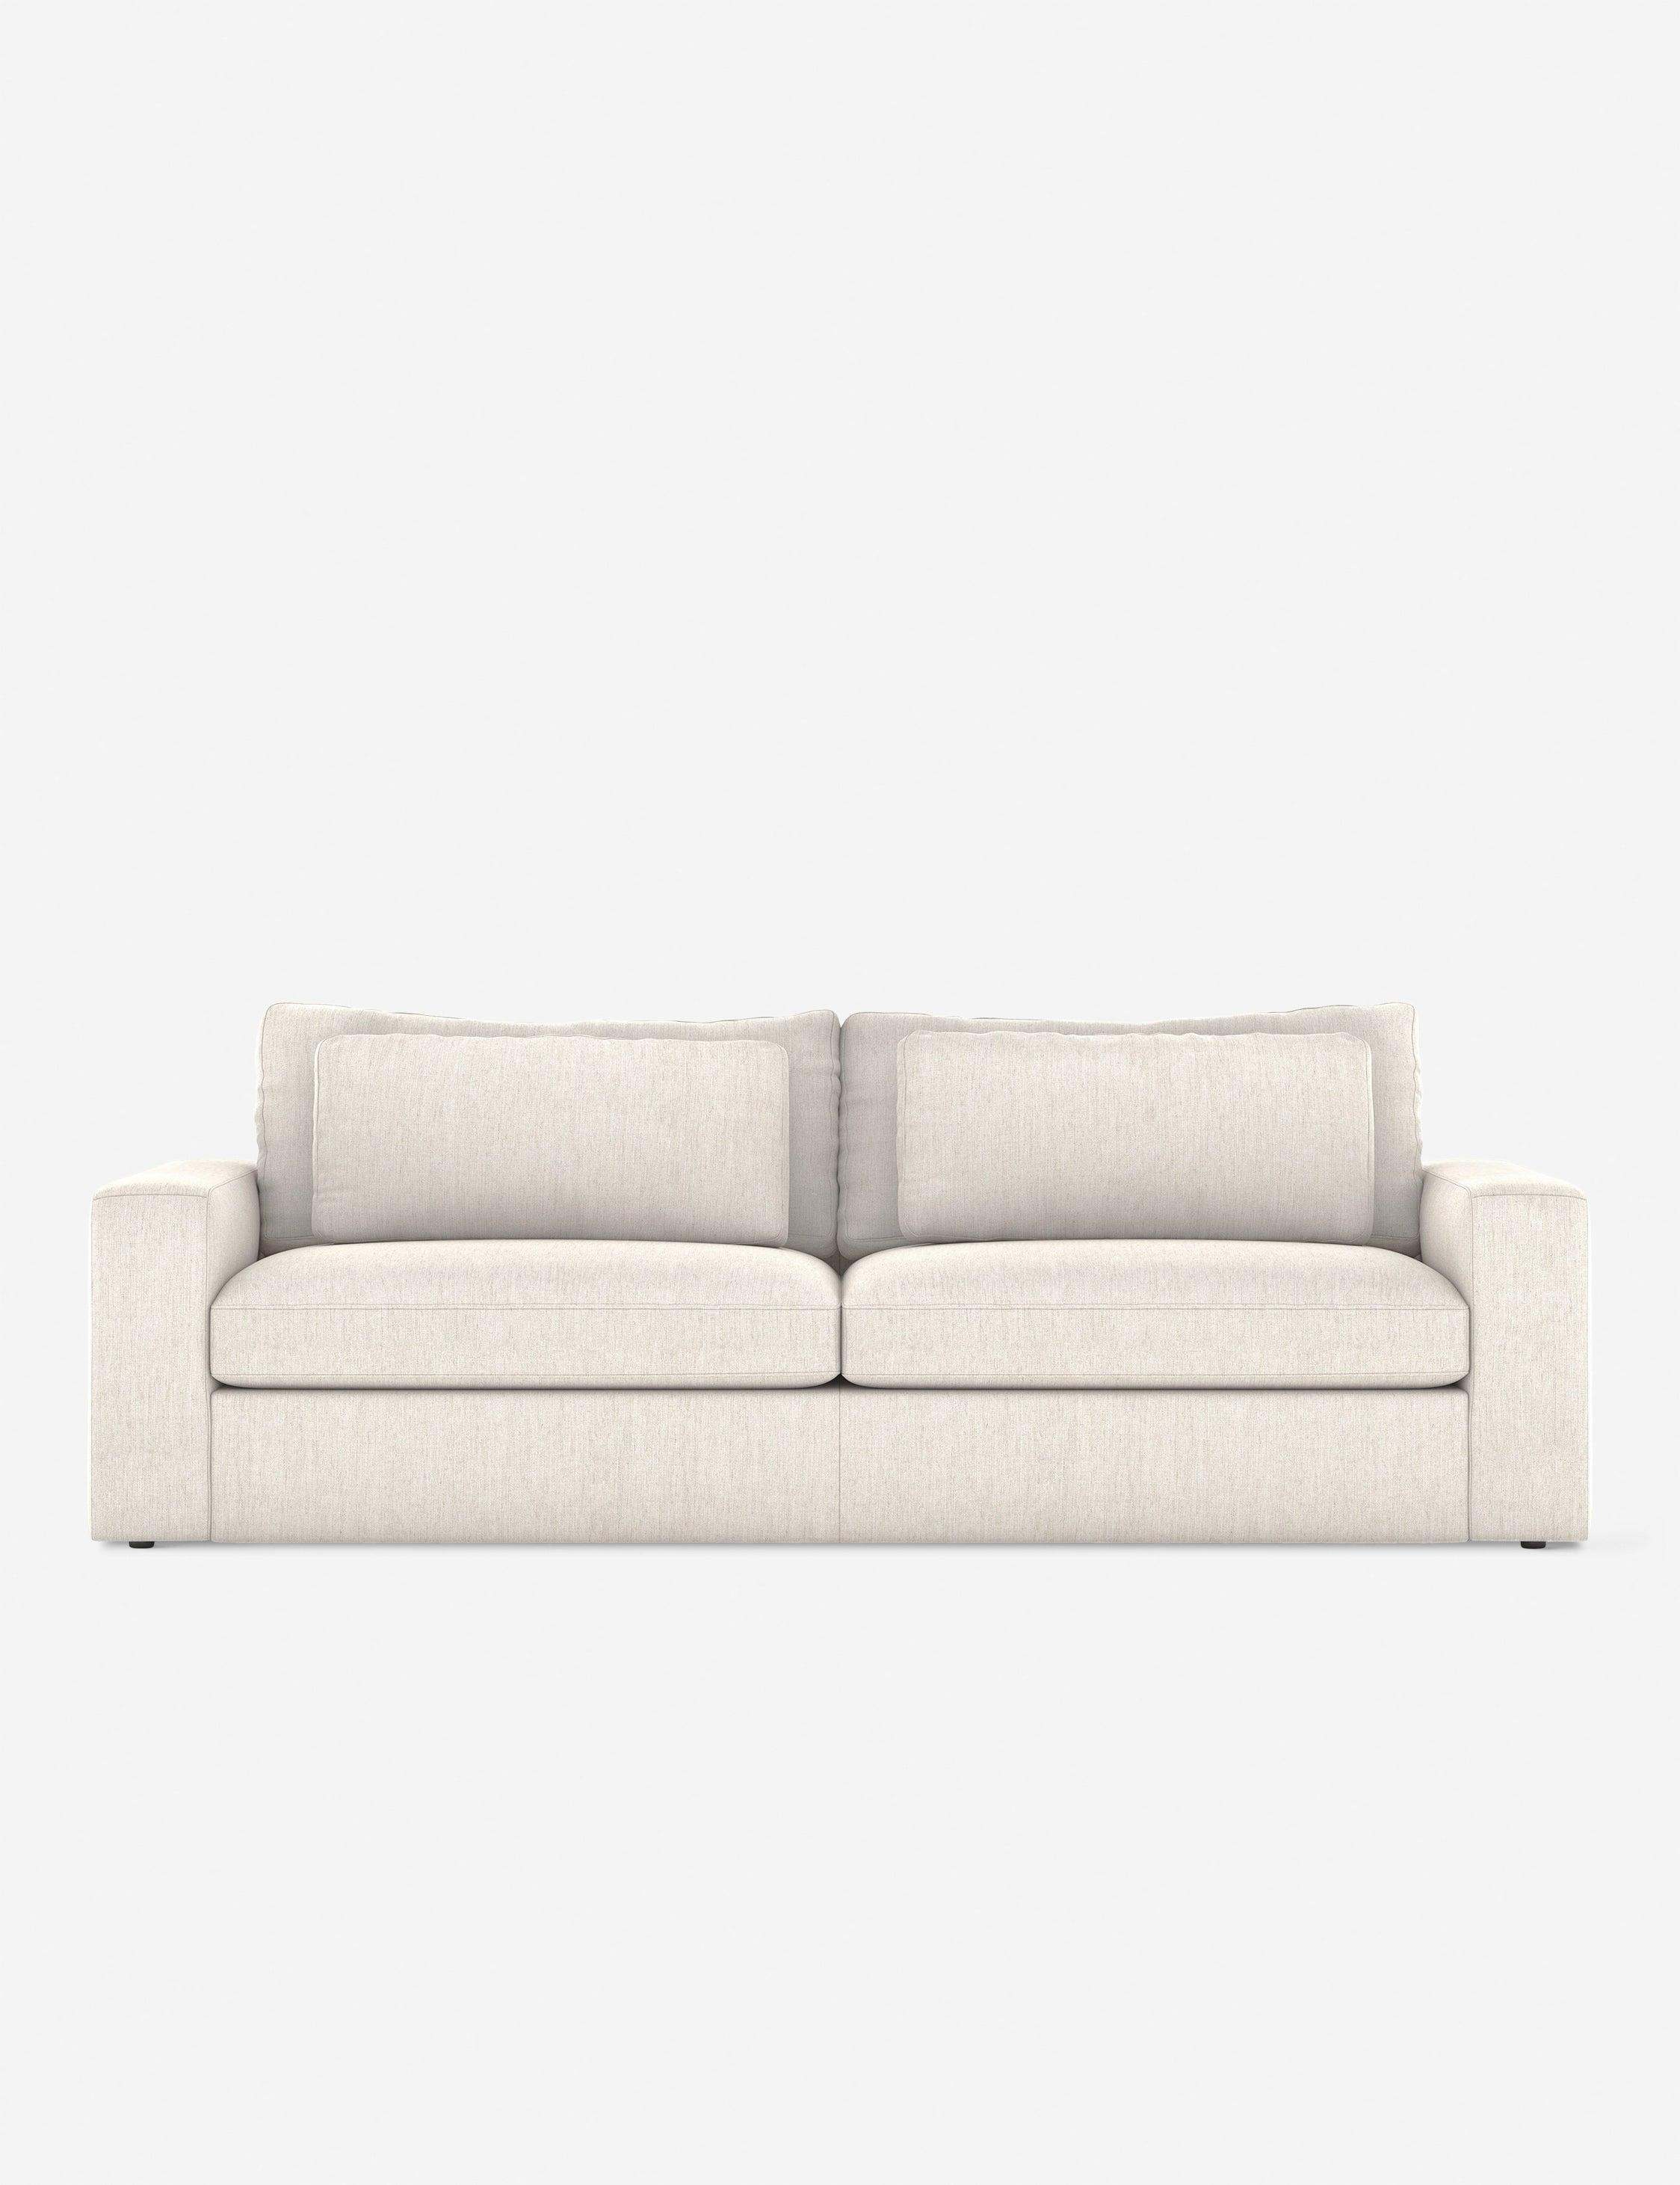 Contemporary Cream Queen Sleeper Sofa with Removable Cushions